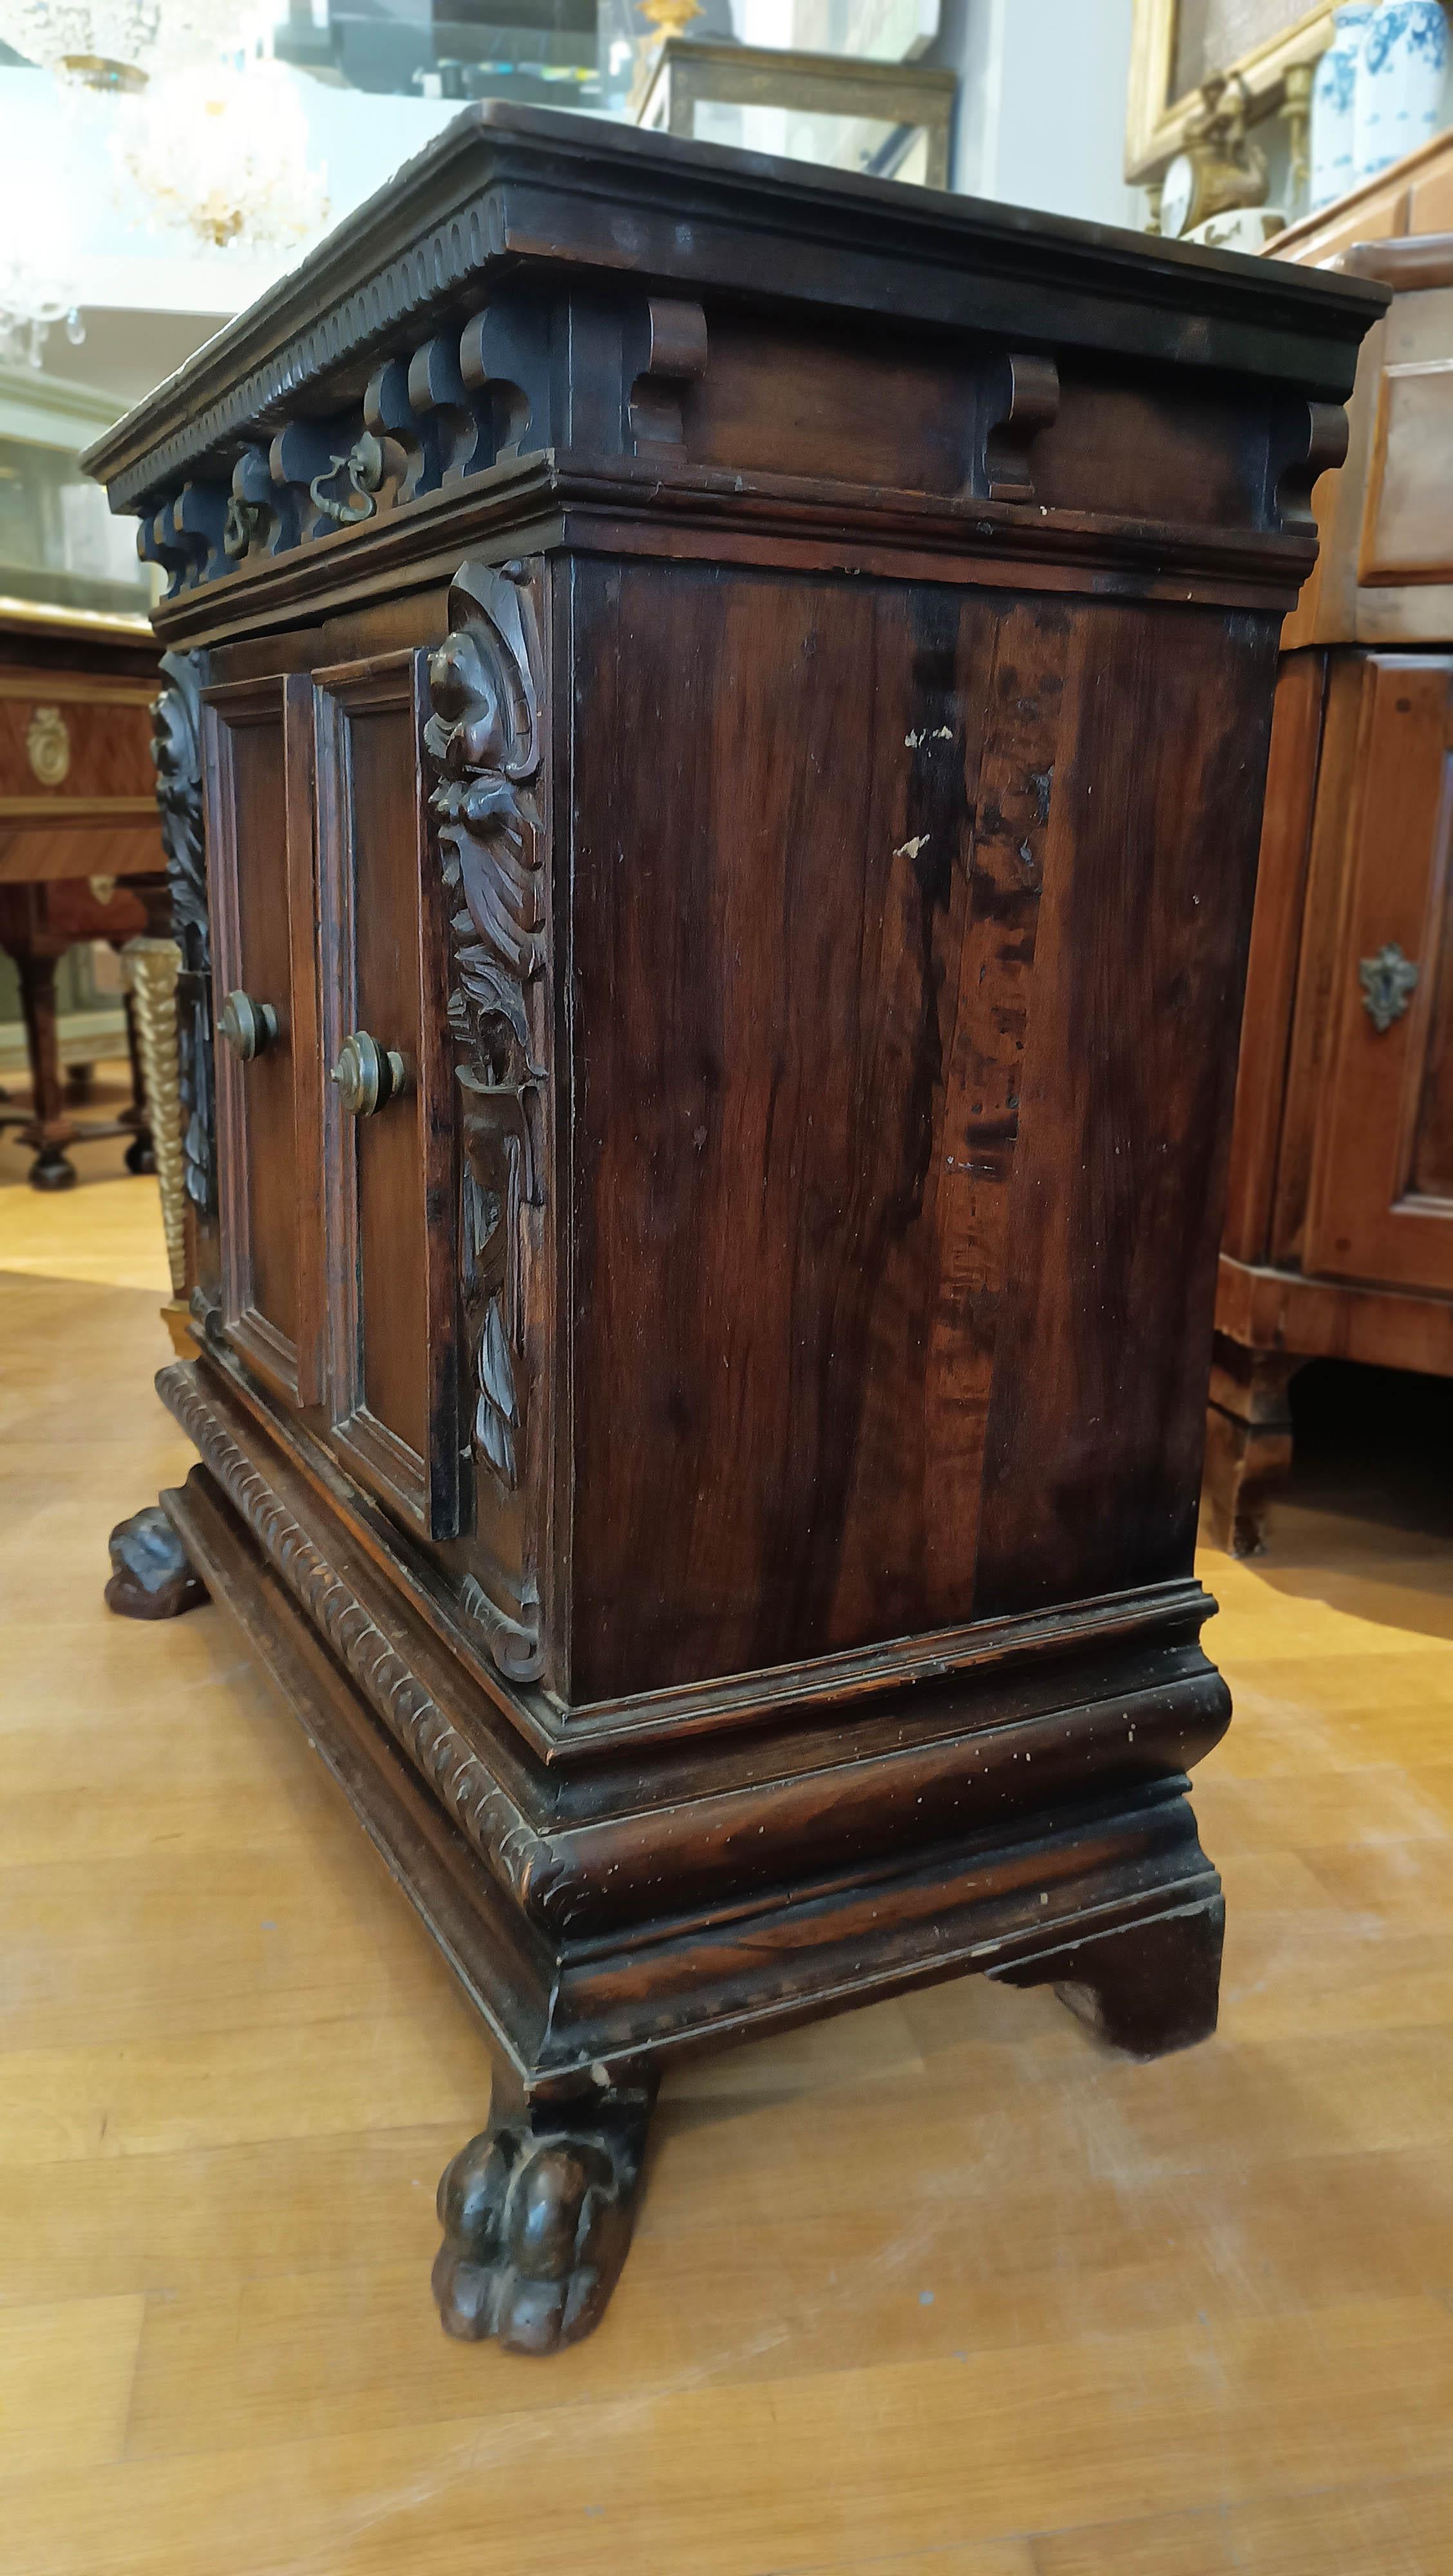 Italian 16th CENTURY RENAISSANCE SMALL SIDEBOARD IN SOLID WALNUT For Sale